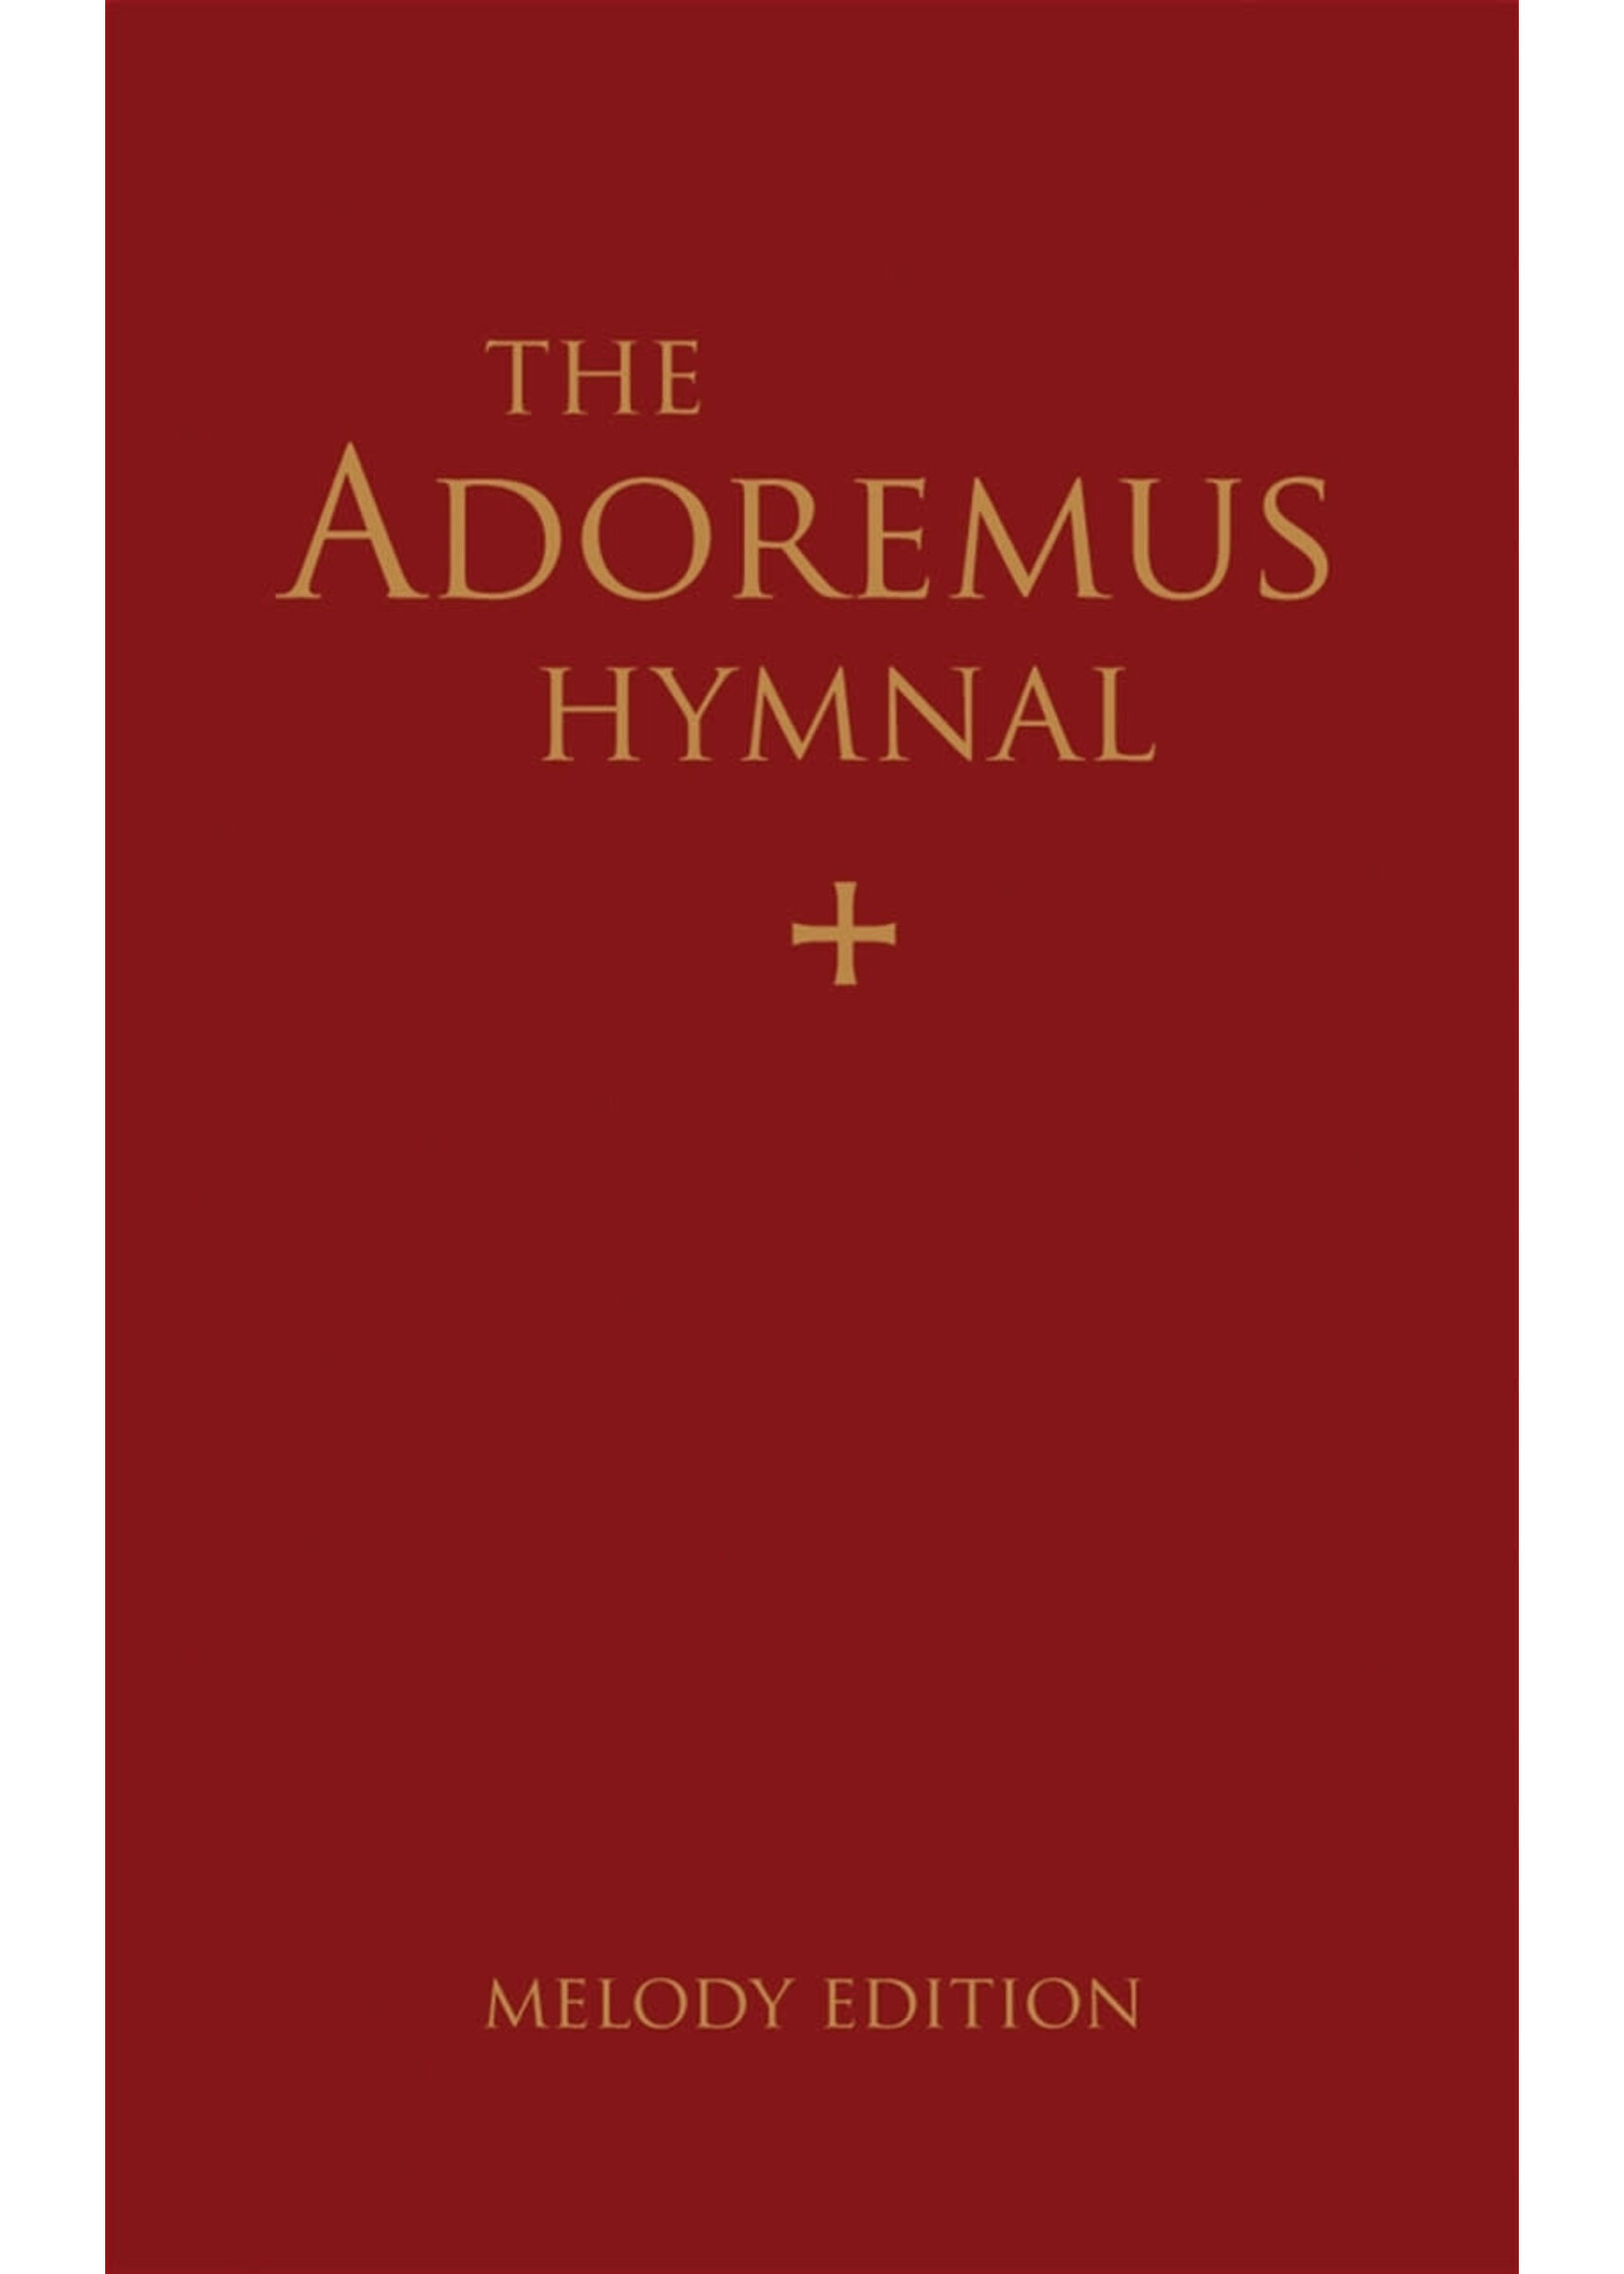 Adoremus Hymnal: Melody Edition, 2nd ed